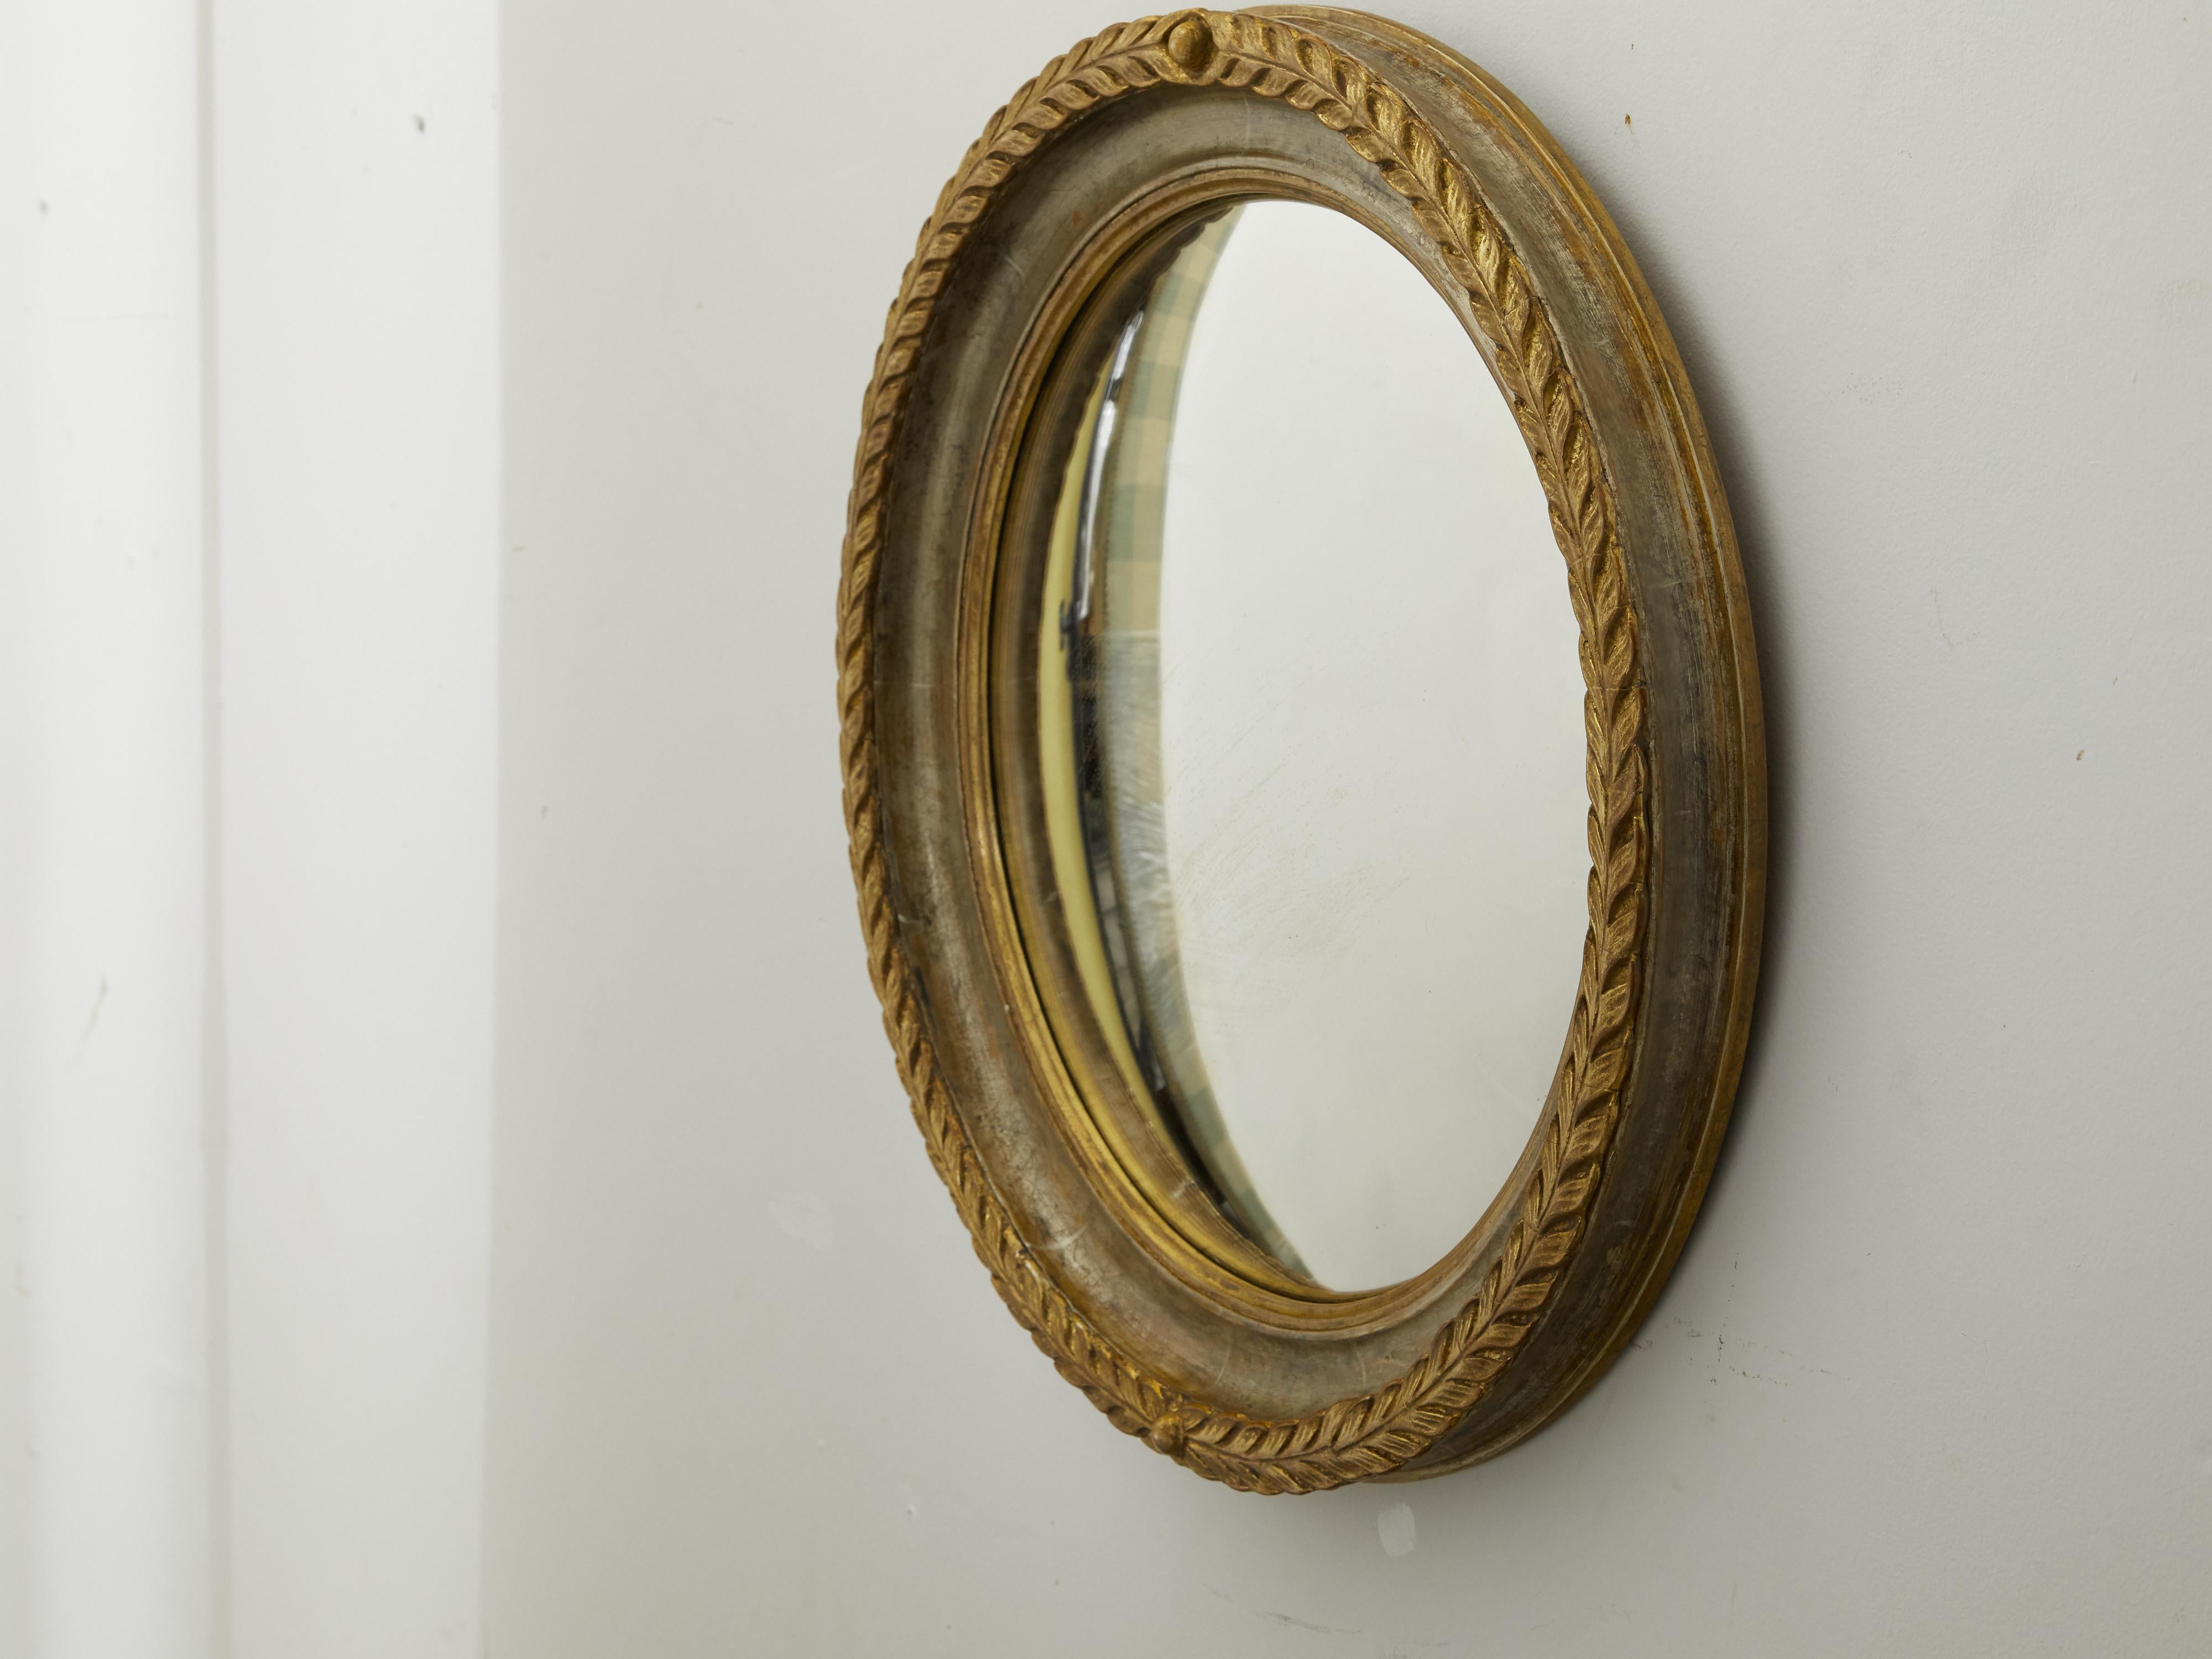 English 1920s-1930s Carved Wooden Round Mirror with Gilt Accents and Foliage 3